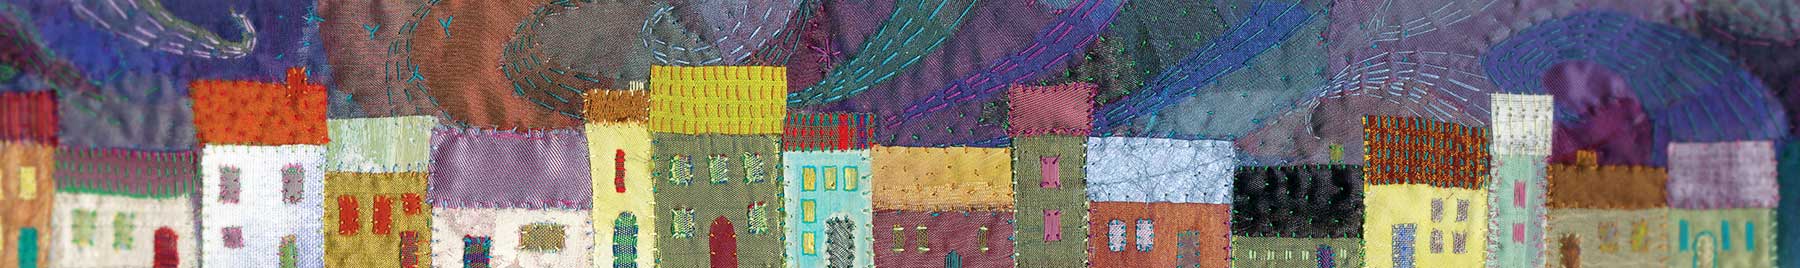 Embroidered textile image of a street